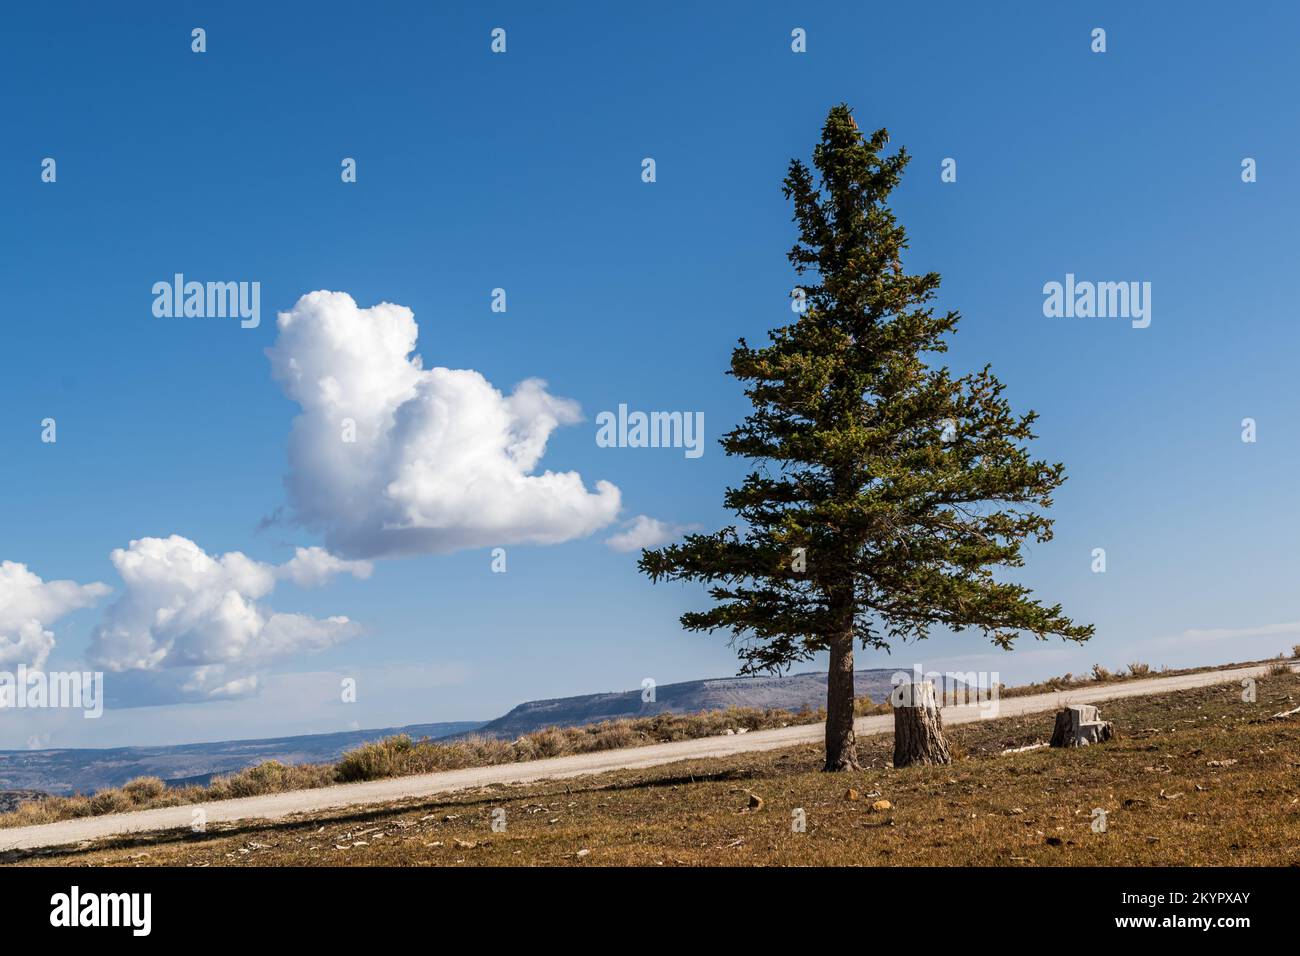 Lone Pine tree on the Skyline, Clear Blue Sky with a Few Floating Clouds Stock Photo